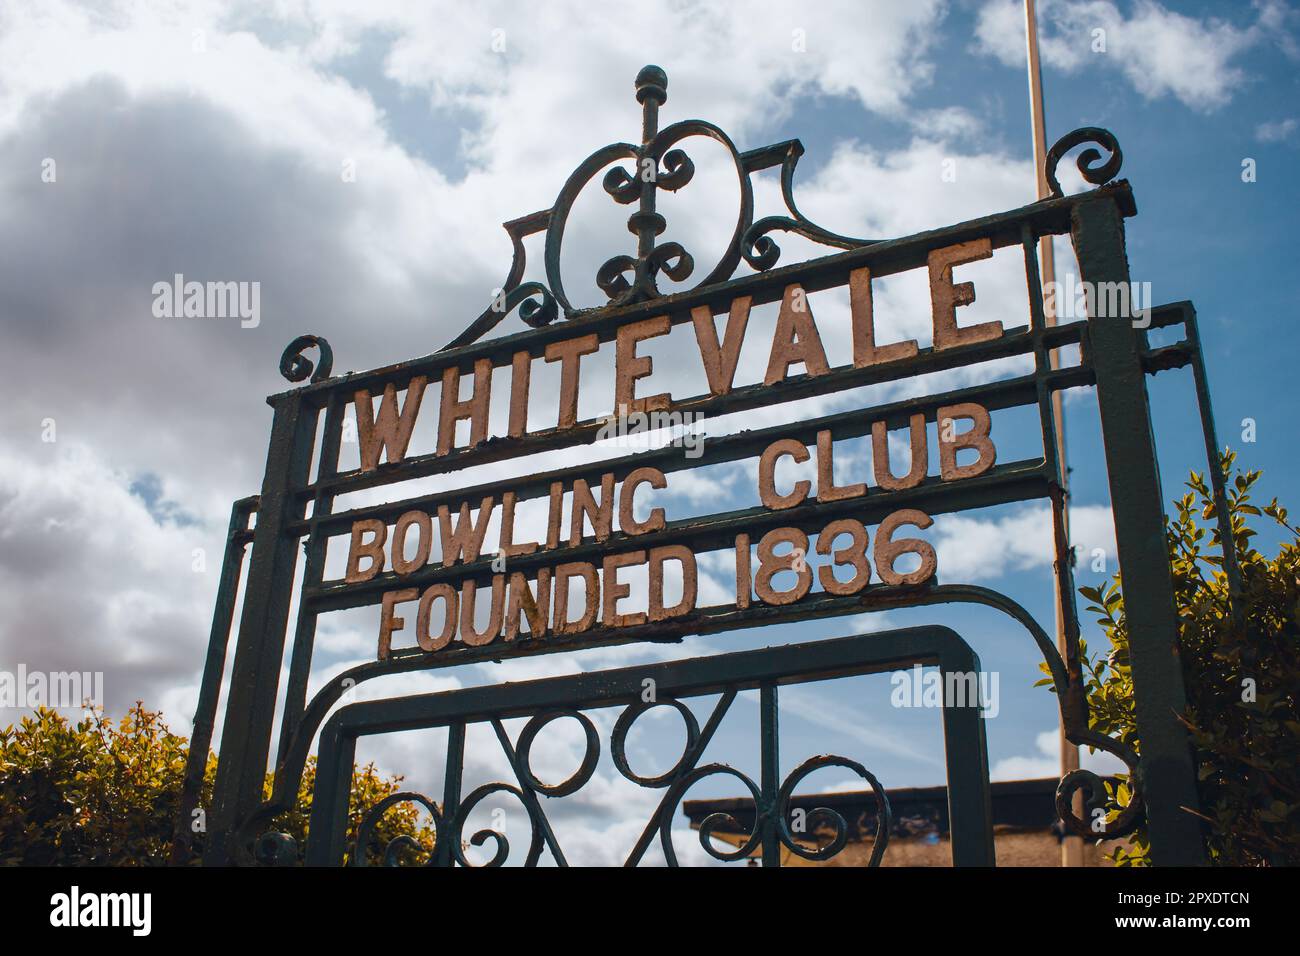 Whitevale Bowling Club in Dennistoun, Glasgow. Located in the End End, it is one of the oldest surviving bowling clubs in Scotland. Stock Photo